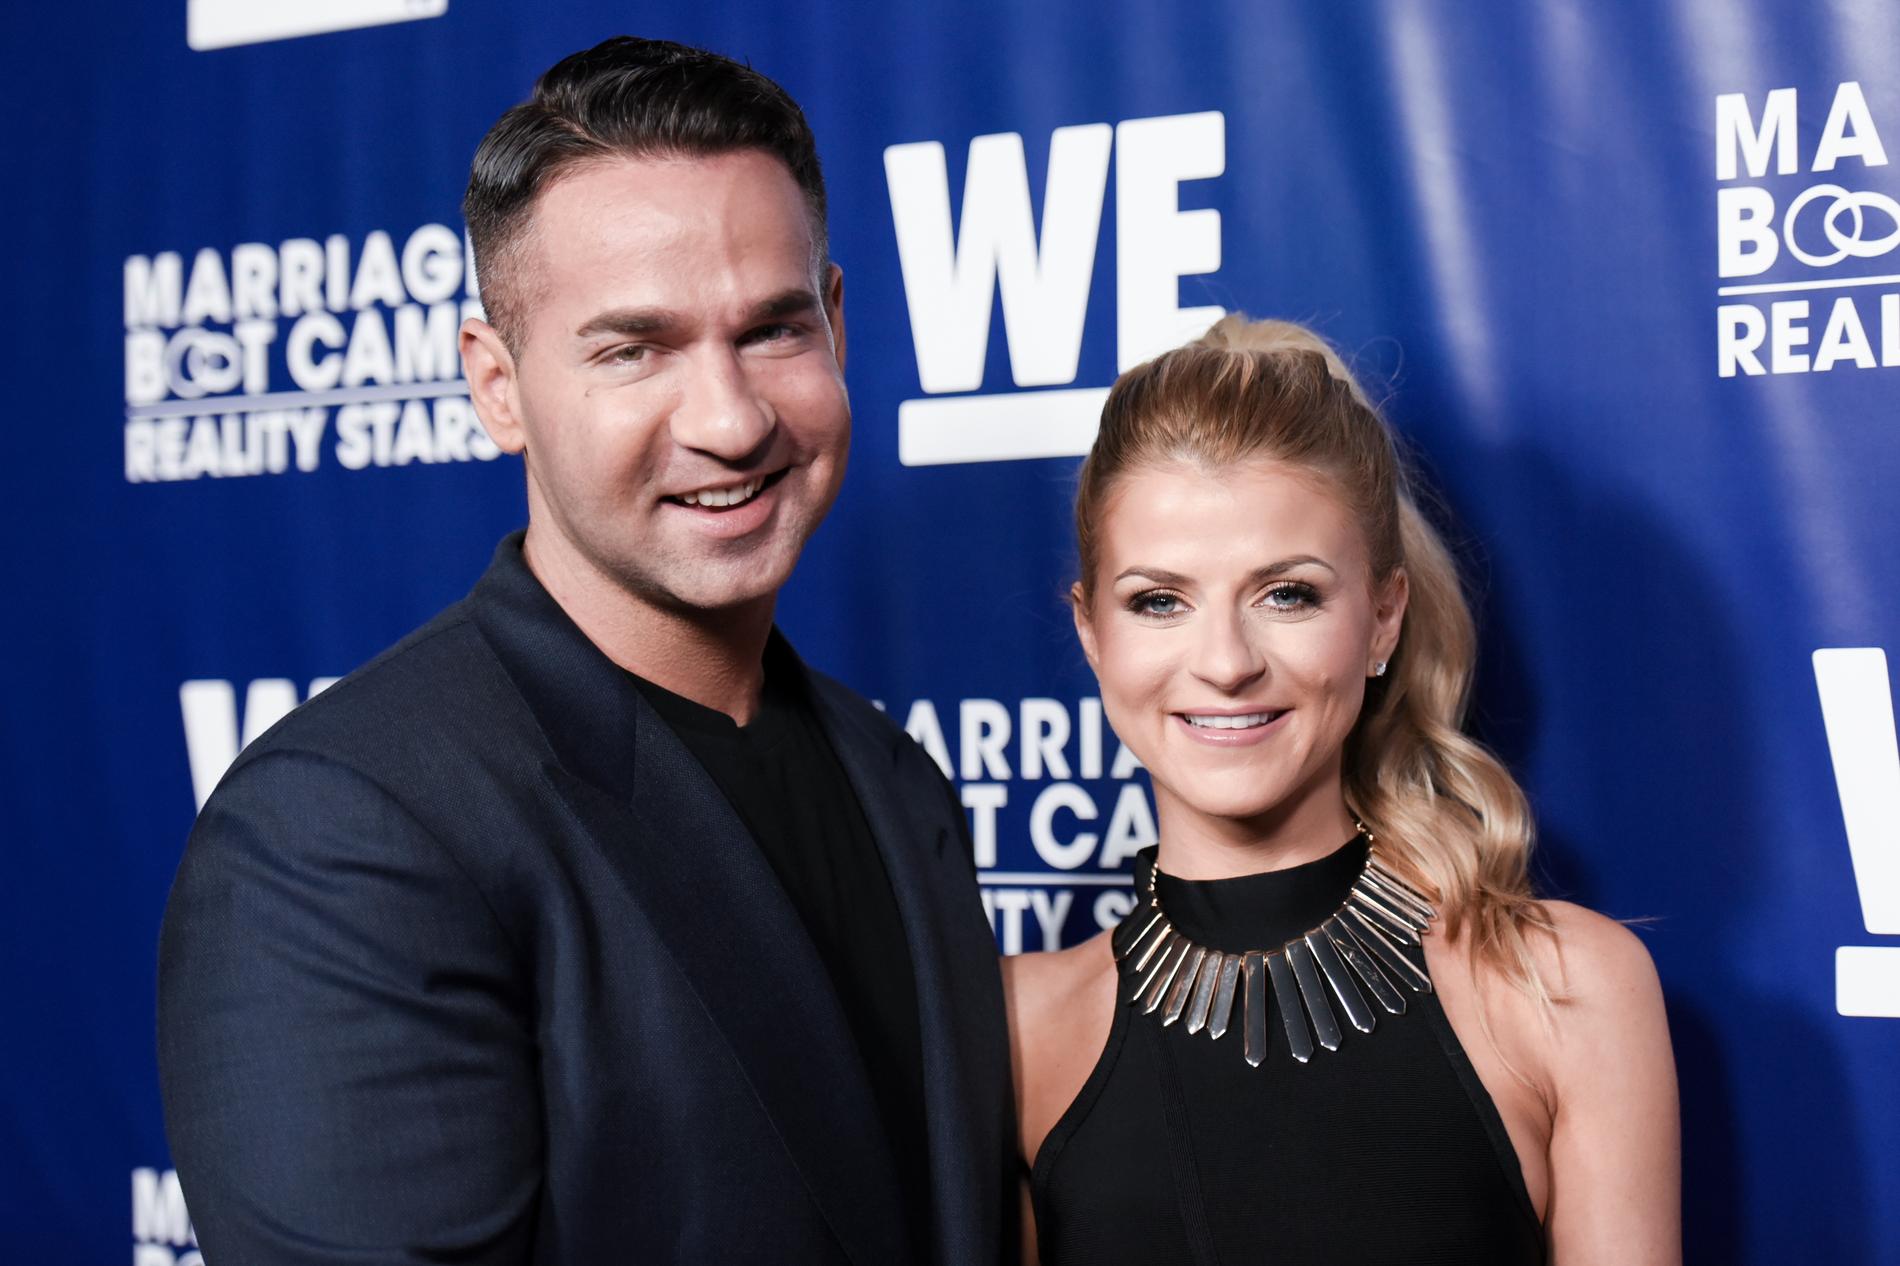 Mike ”The Situation” Sorrentino och Lauren Pesce.